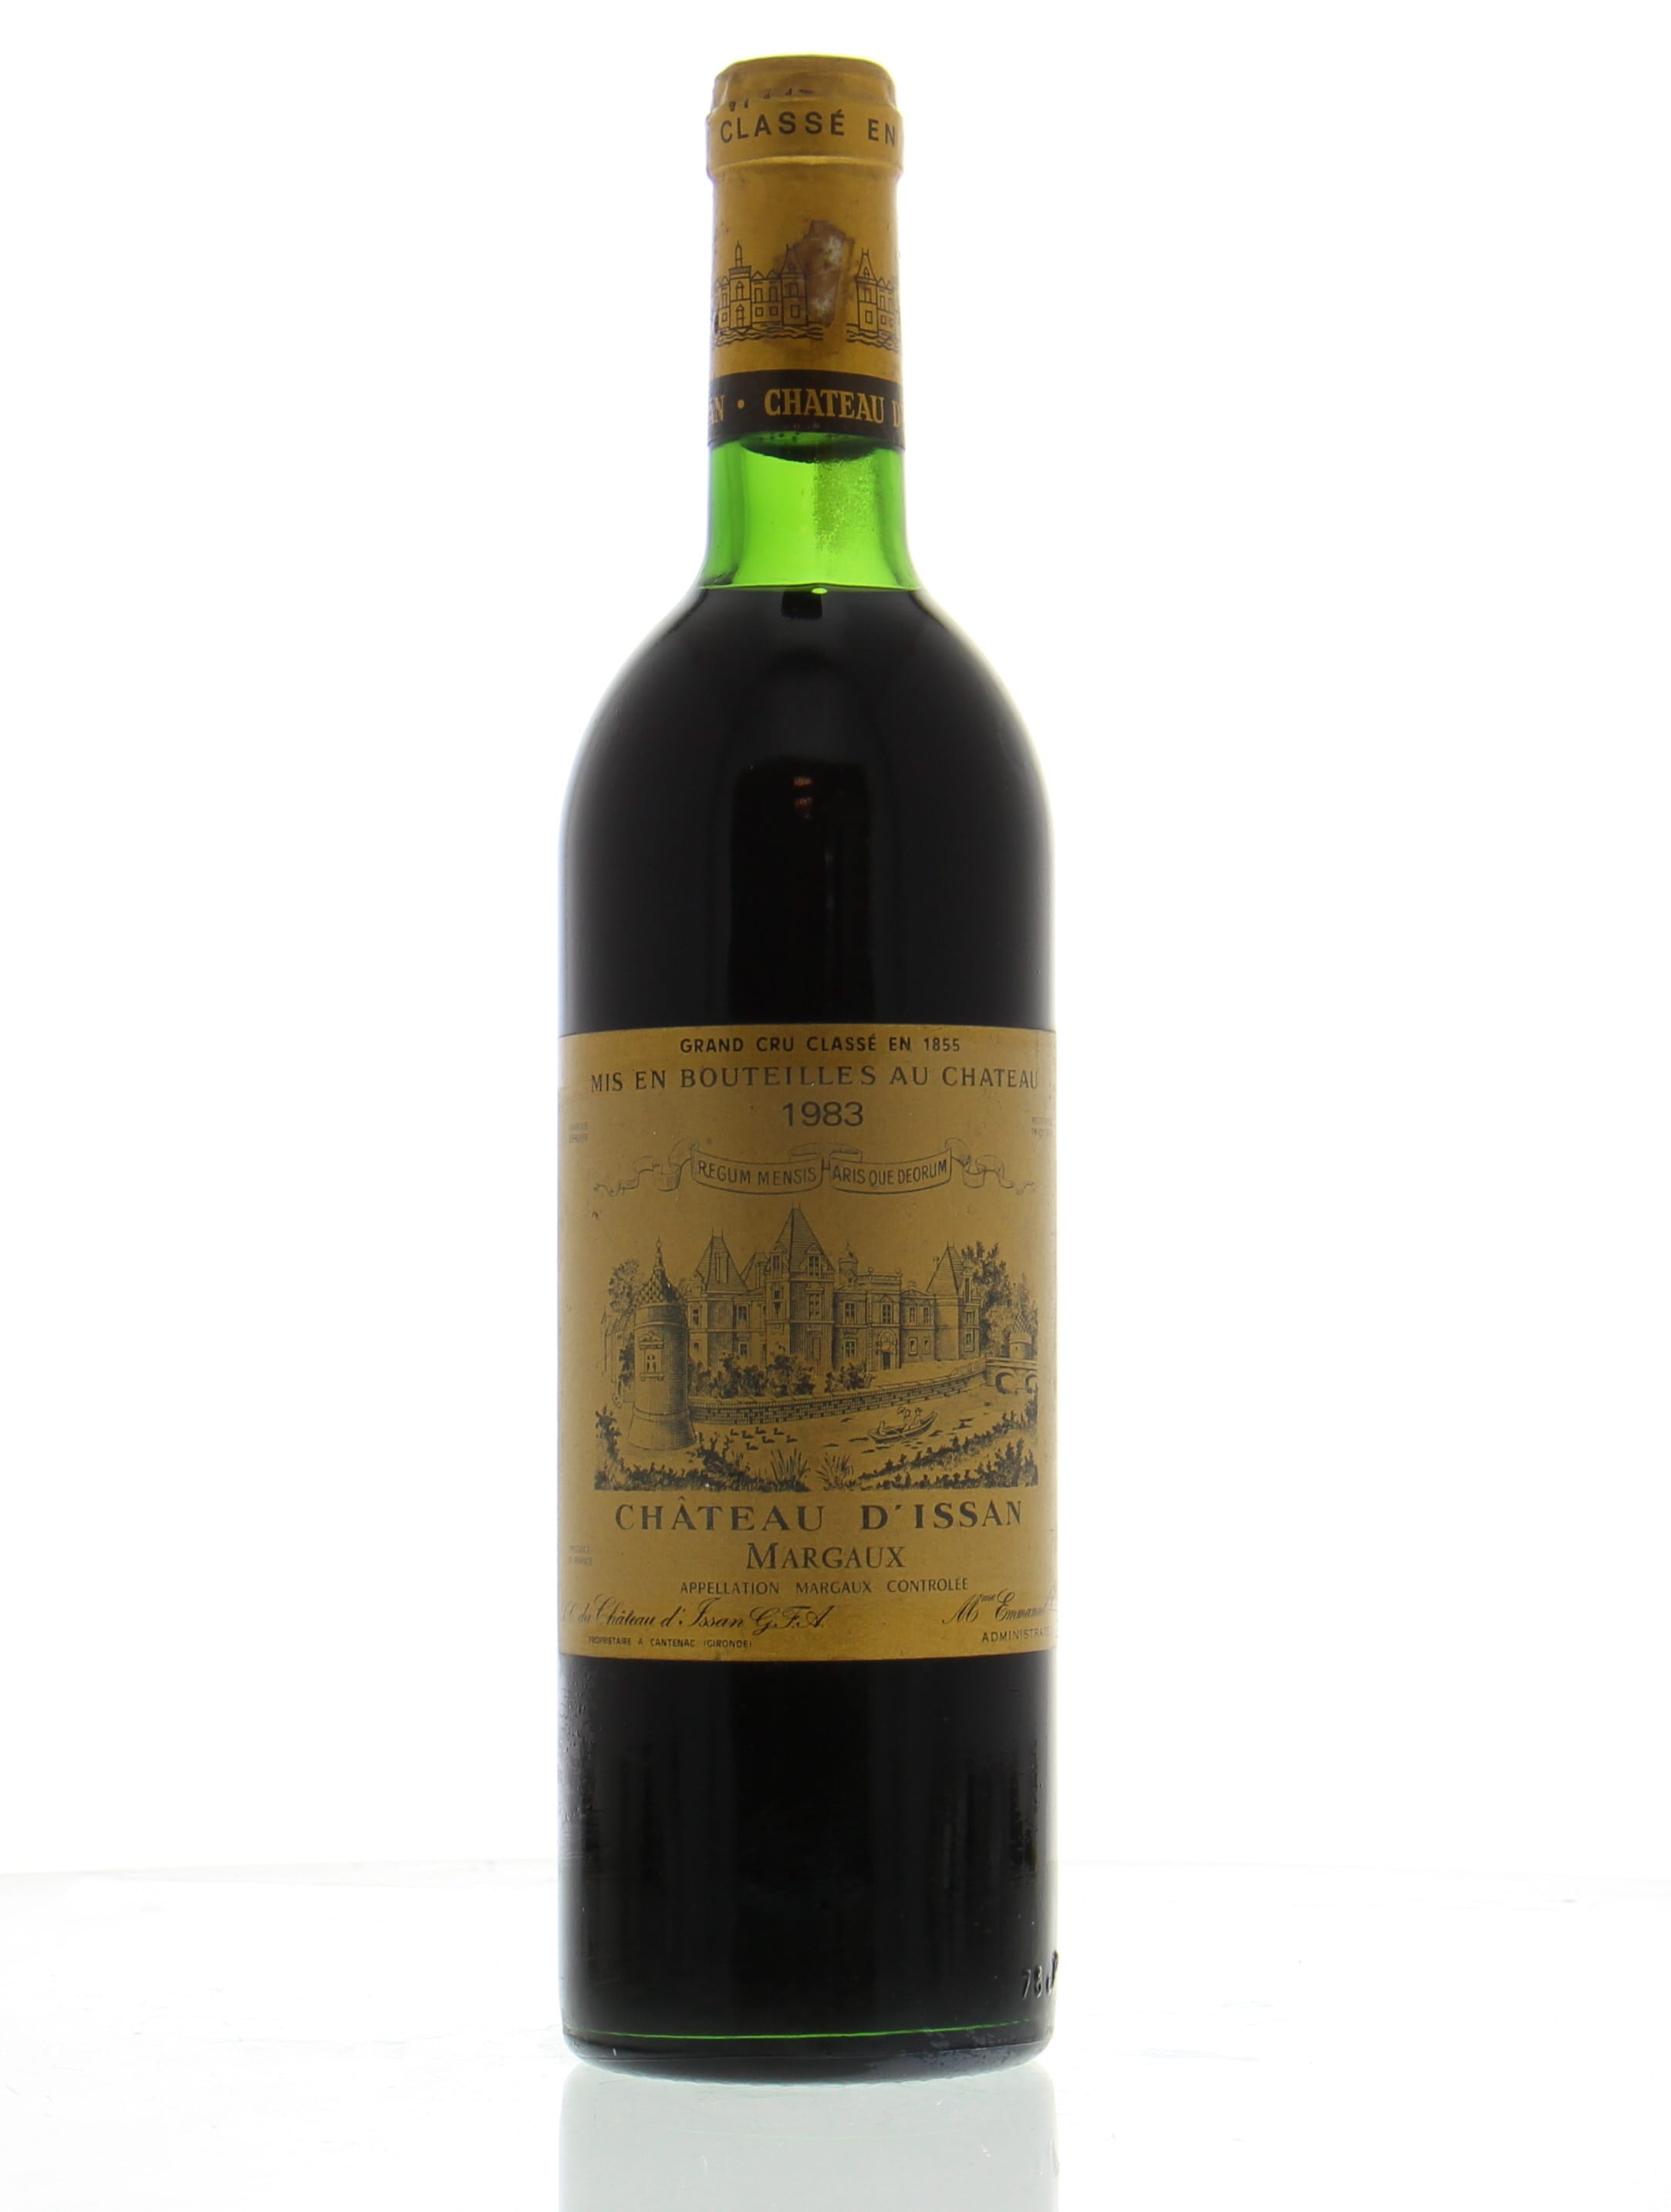 Chateau D'Issan - Chateau D'Issan 1983 Top Shoulder